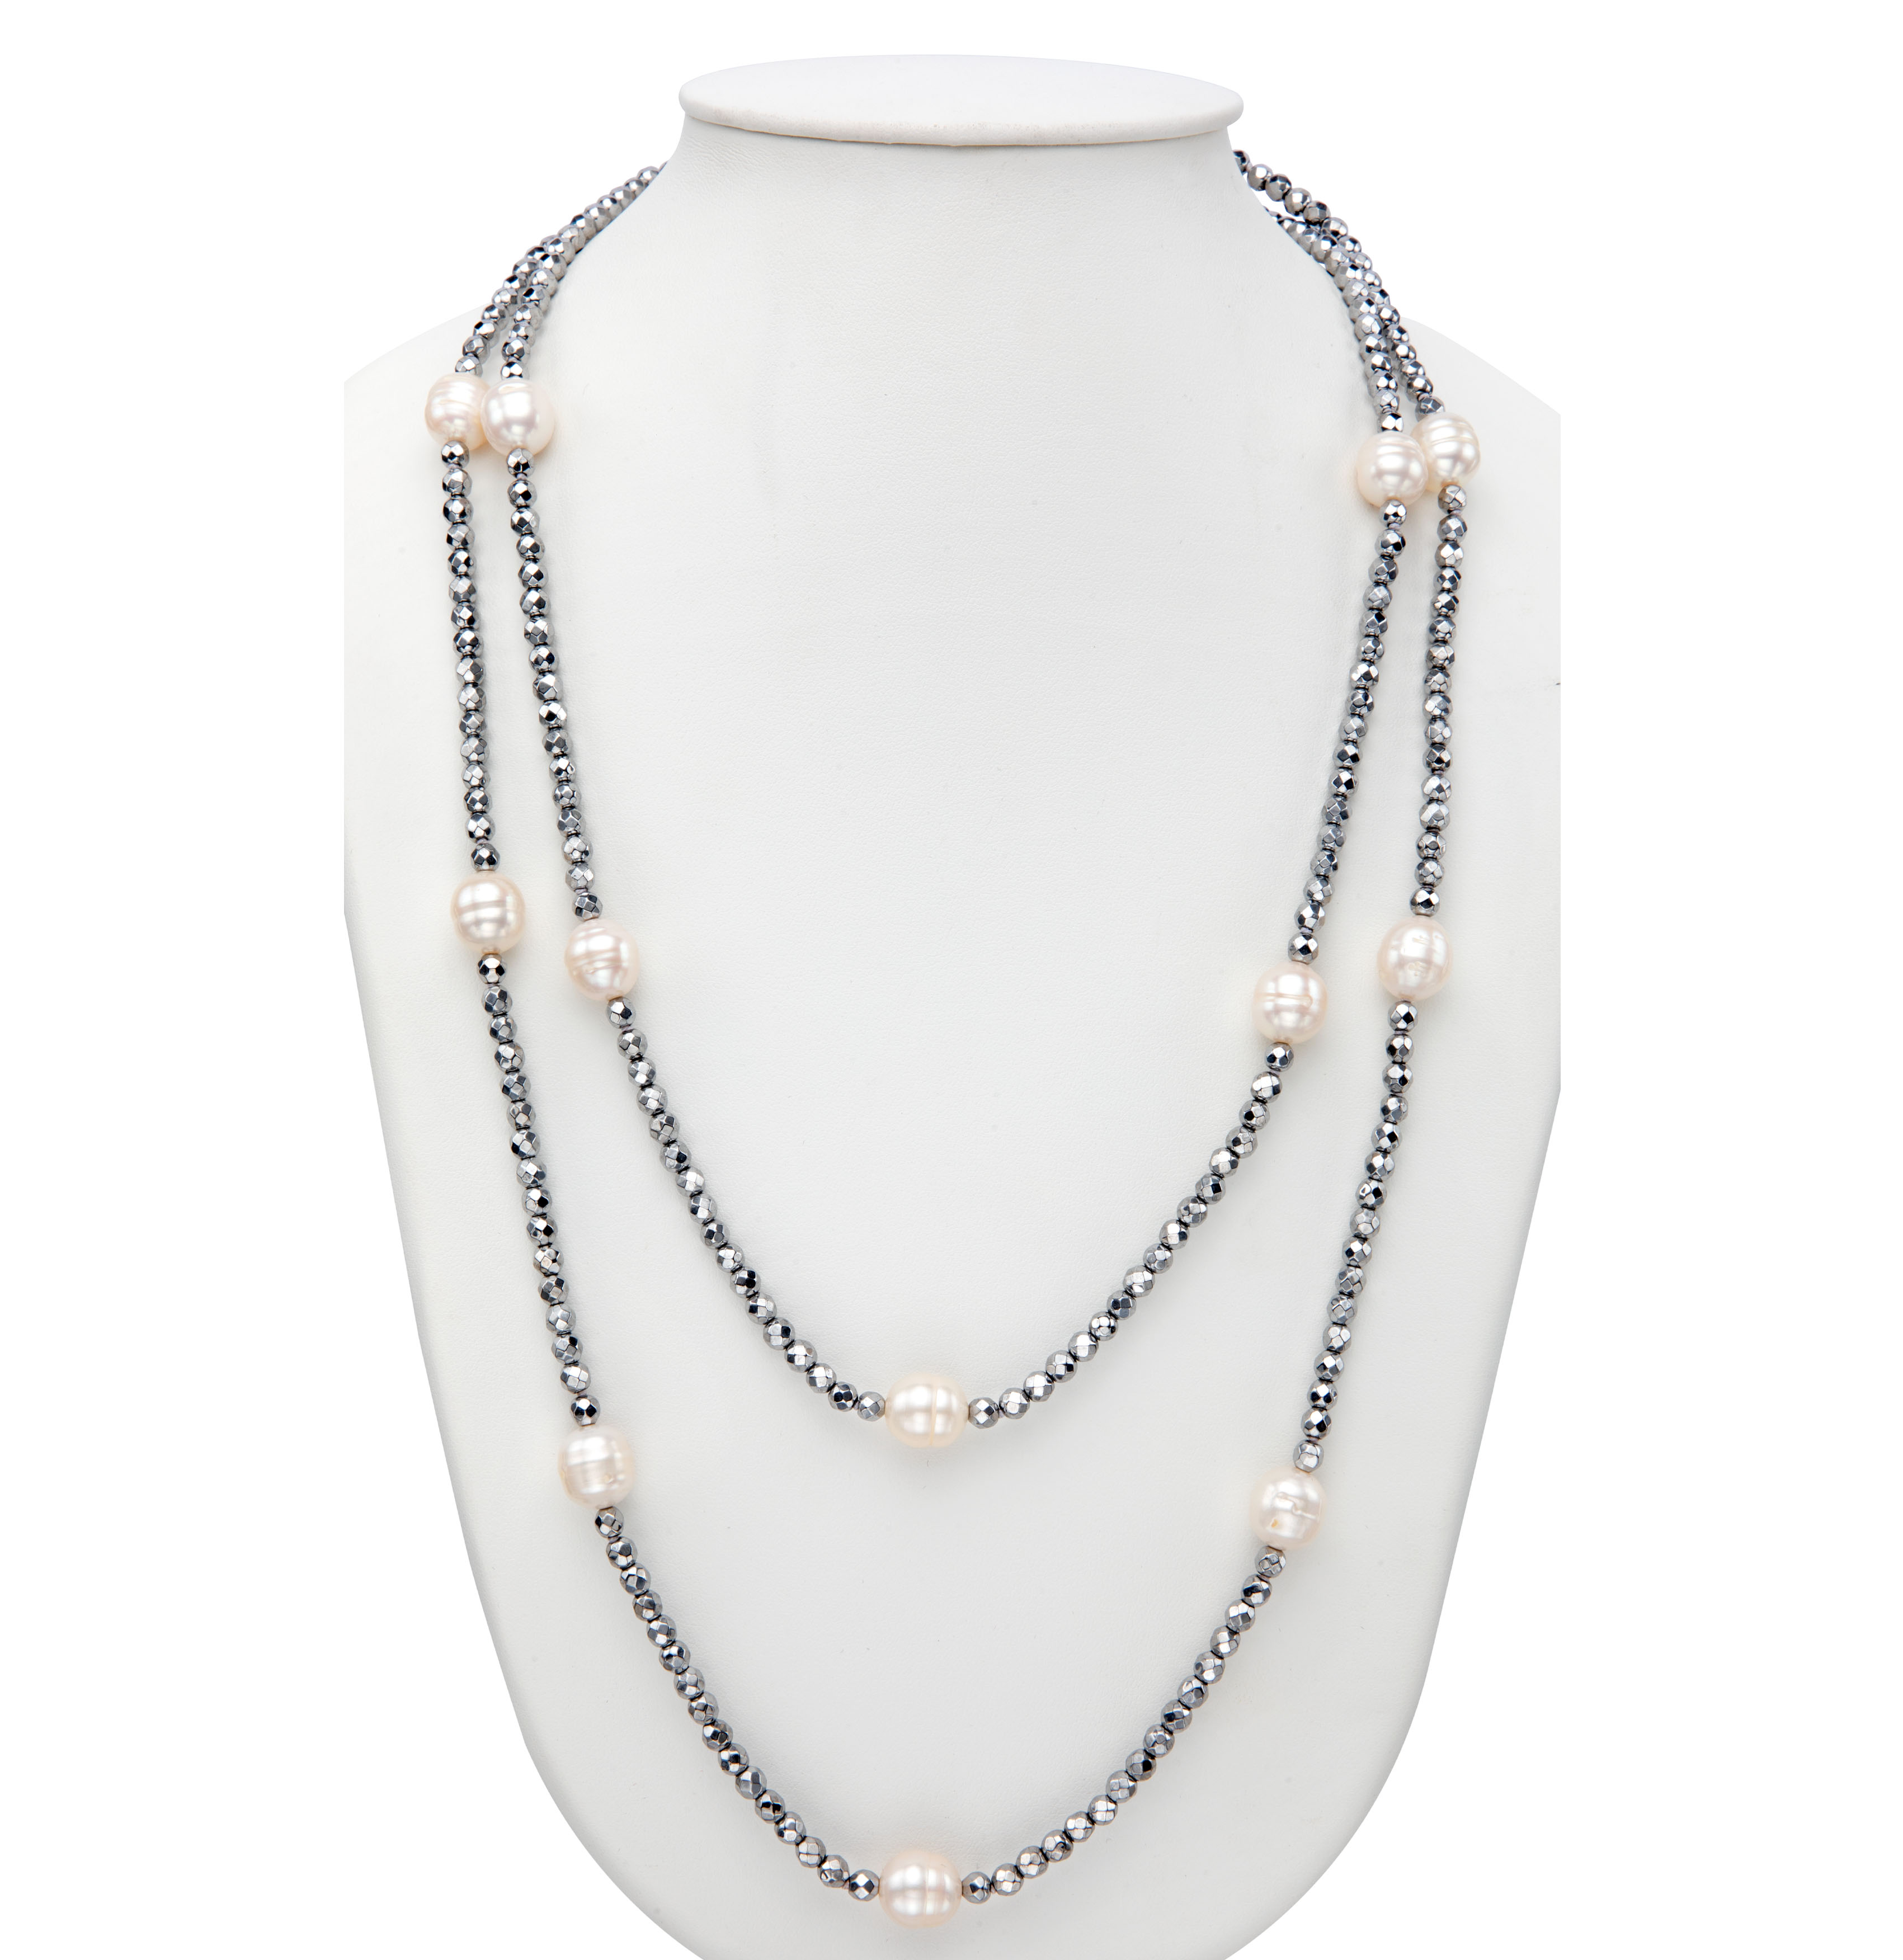 Beeds And Pearls Necklace | Mangatrai Pearls & Jewellers